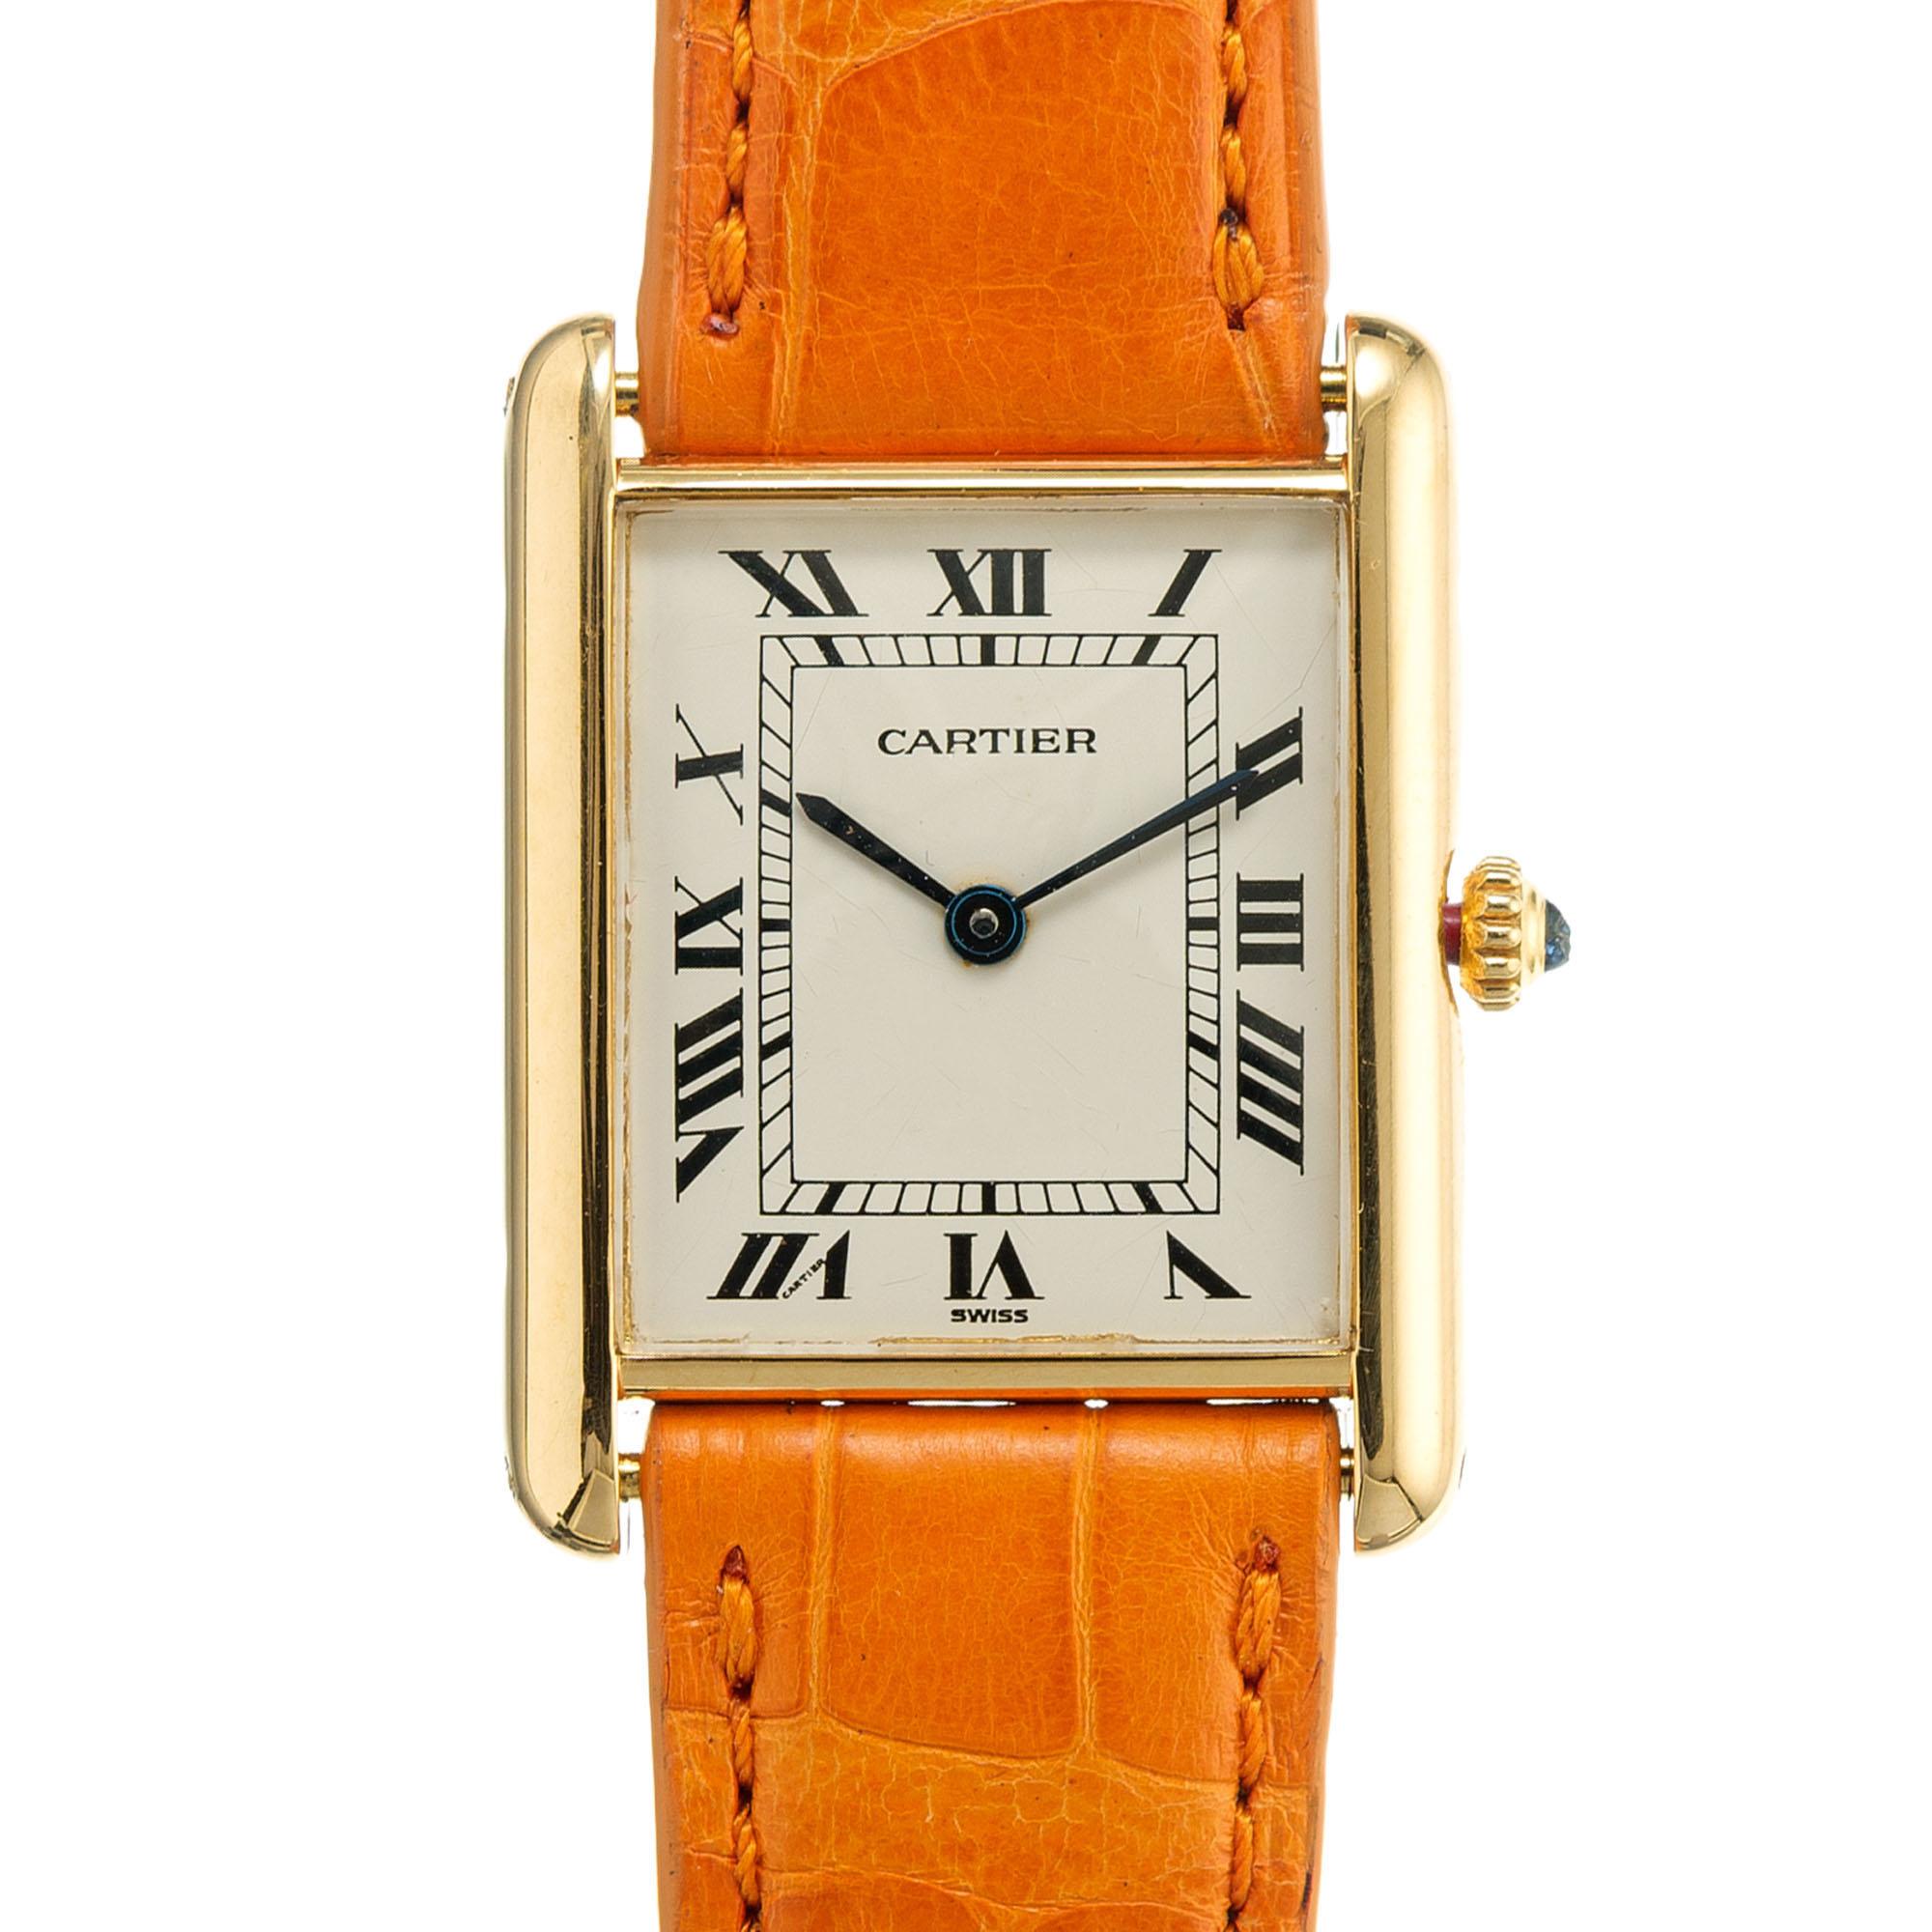 Cartier tank quartz ladies wristwatch. Parchment dial. Sapphire dial. Cartier strap and 18k yellow gold Cartier buckle. Complete service

26.8 grams
Length: 30.53mm
Width: 23.45mm
Band width at case: 17.55mm
Case thickness: 6.03mm
Band: Genuine